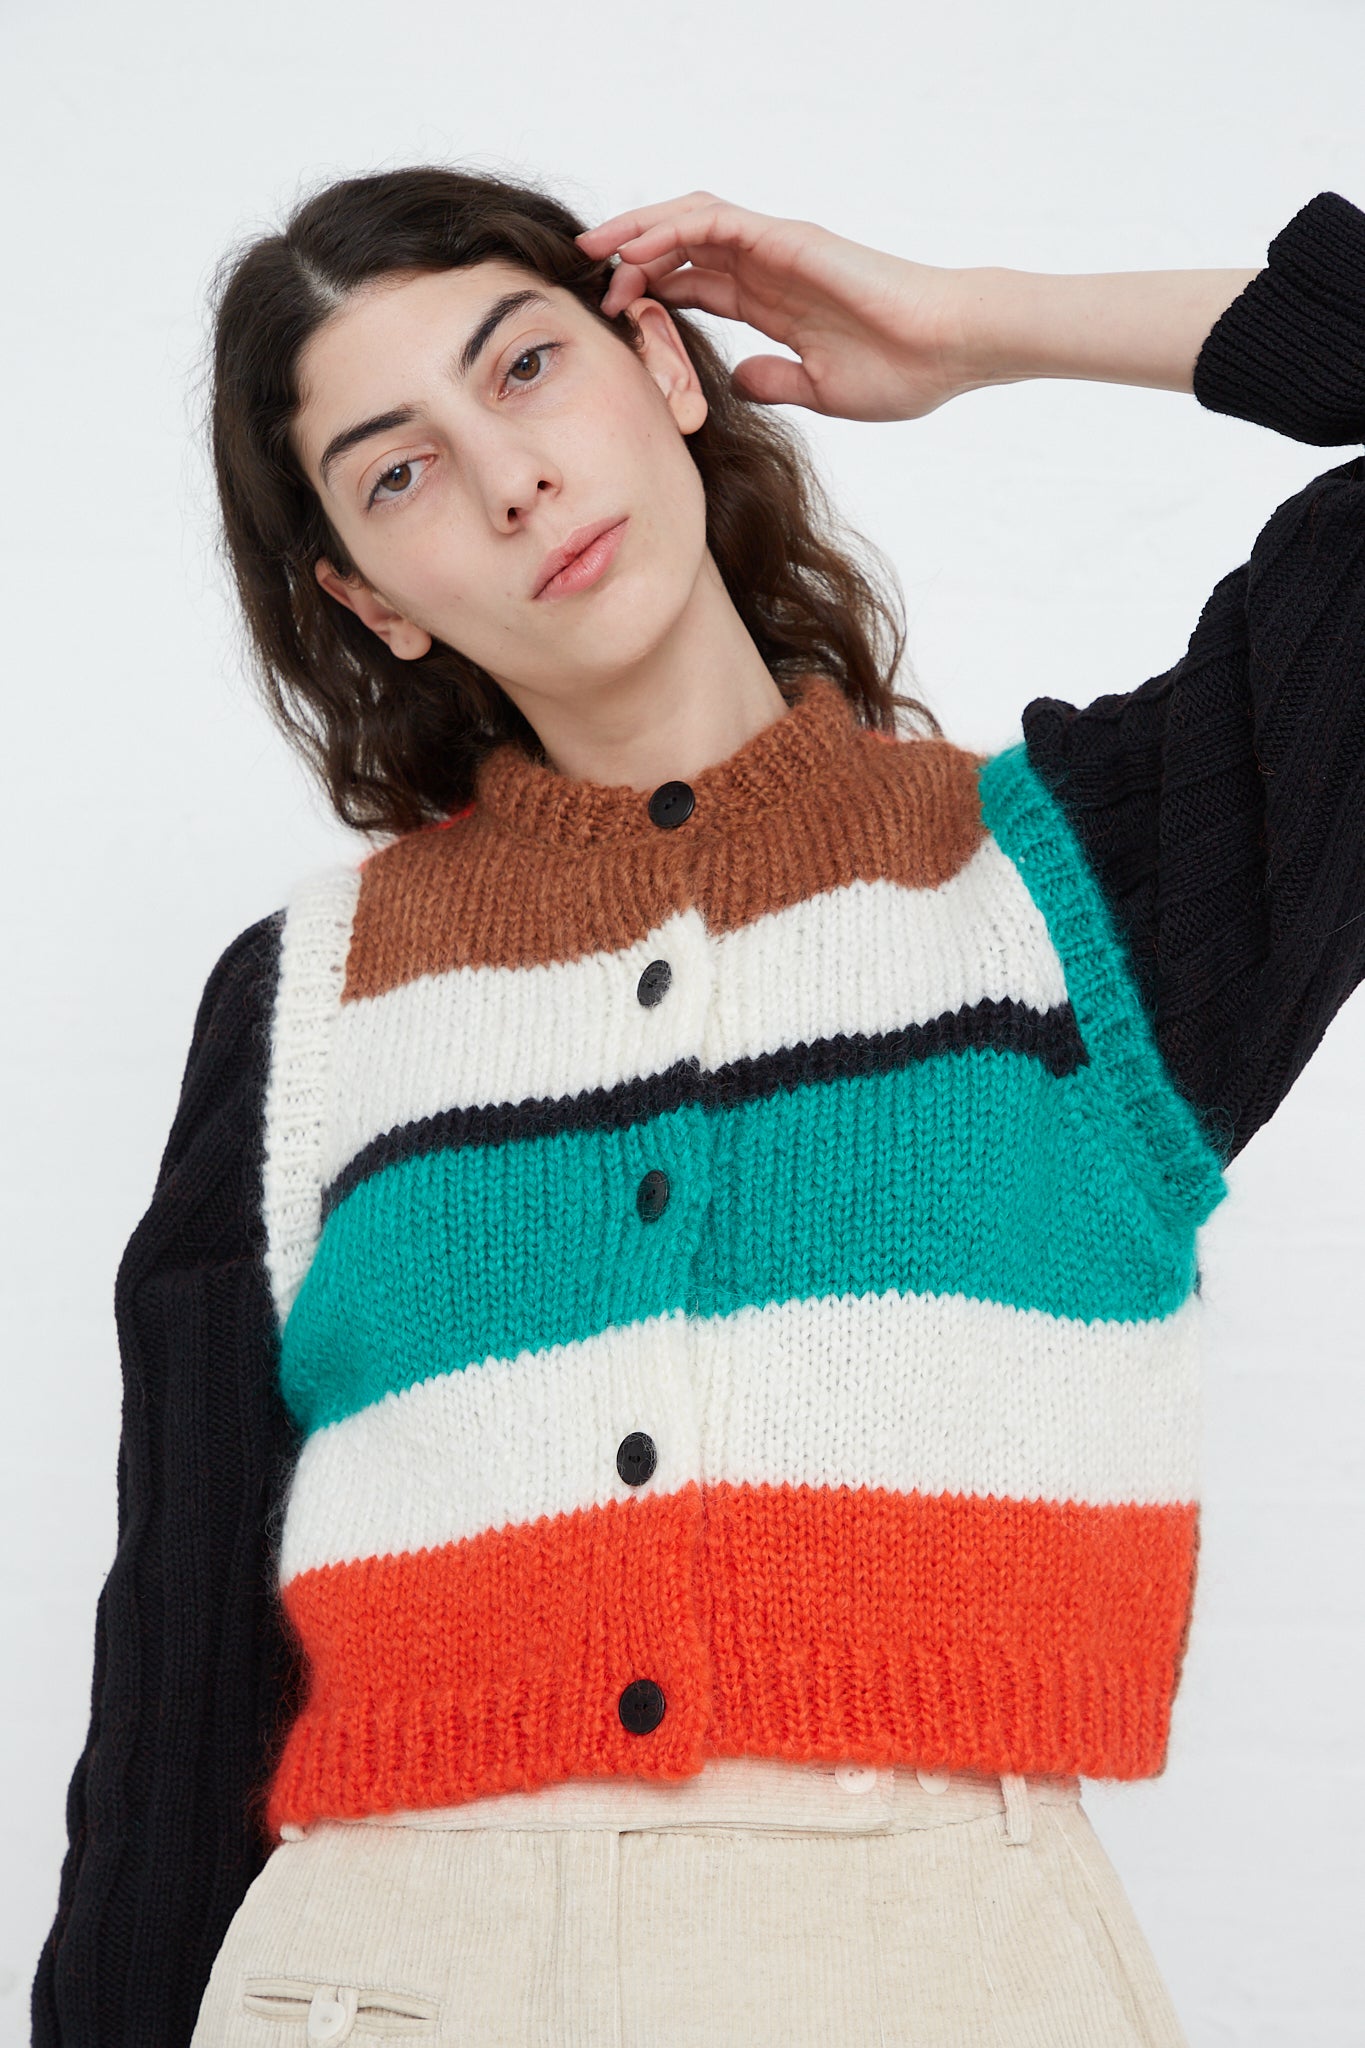 A model wearing a Cordera mohair waistcoat in striped with multicolored stripes.